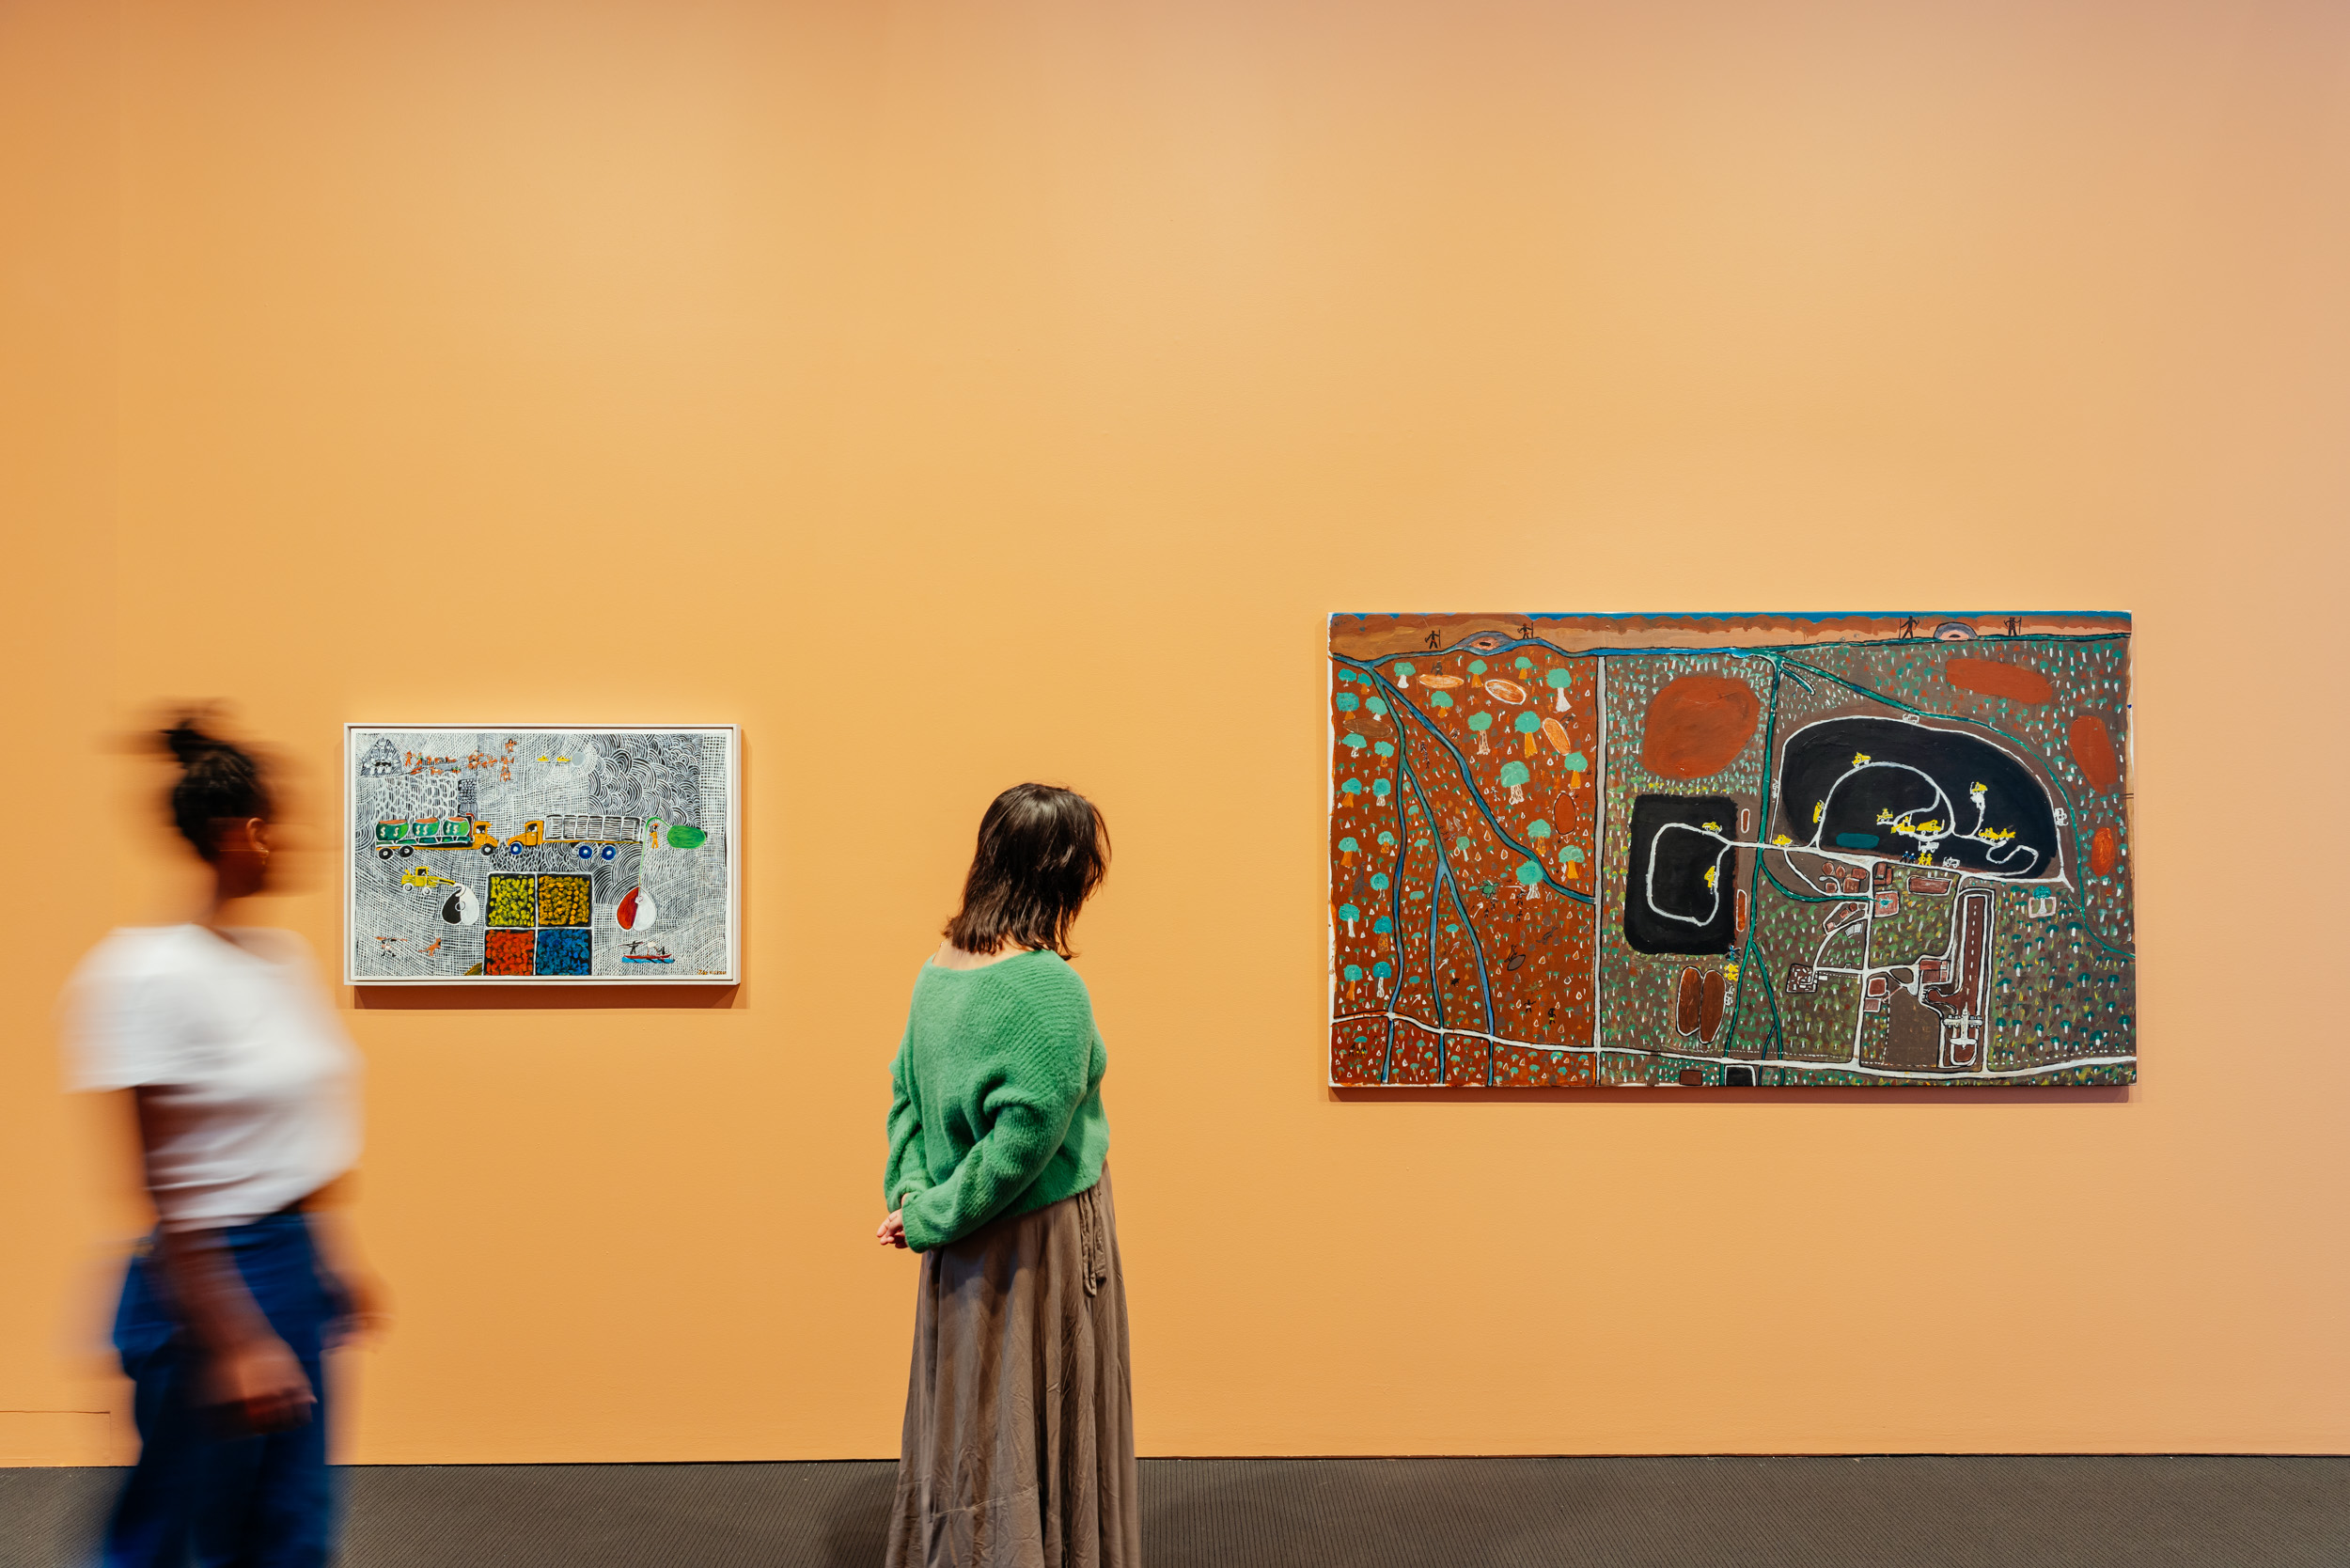 Two people viewing paintings that are hanging on a gallery wall